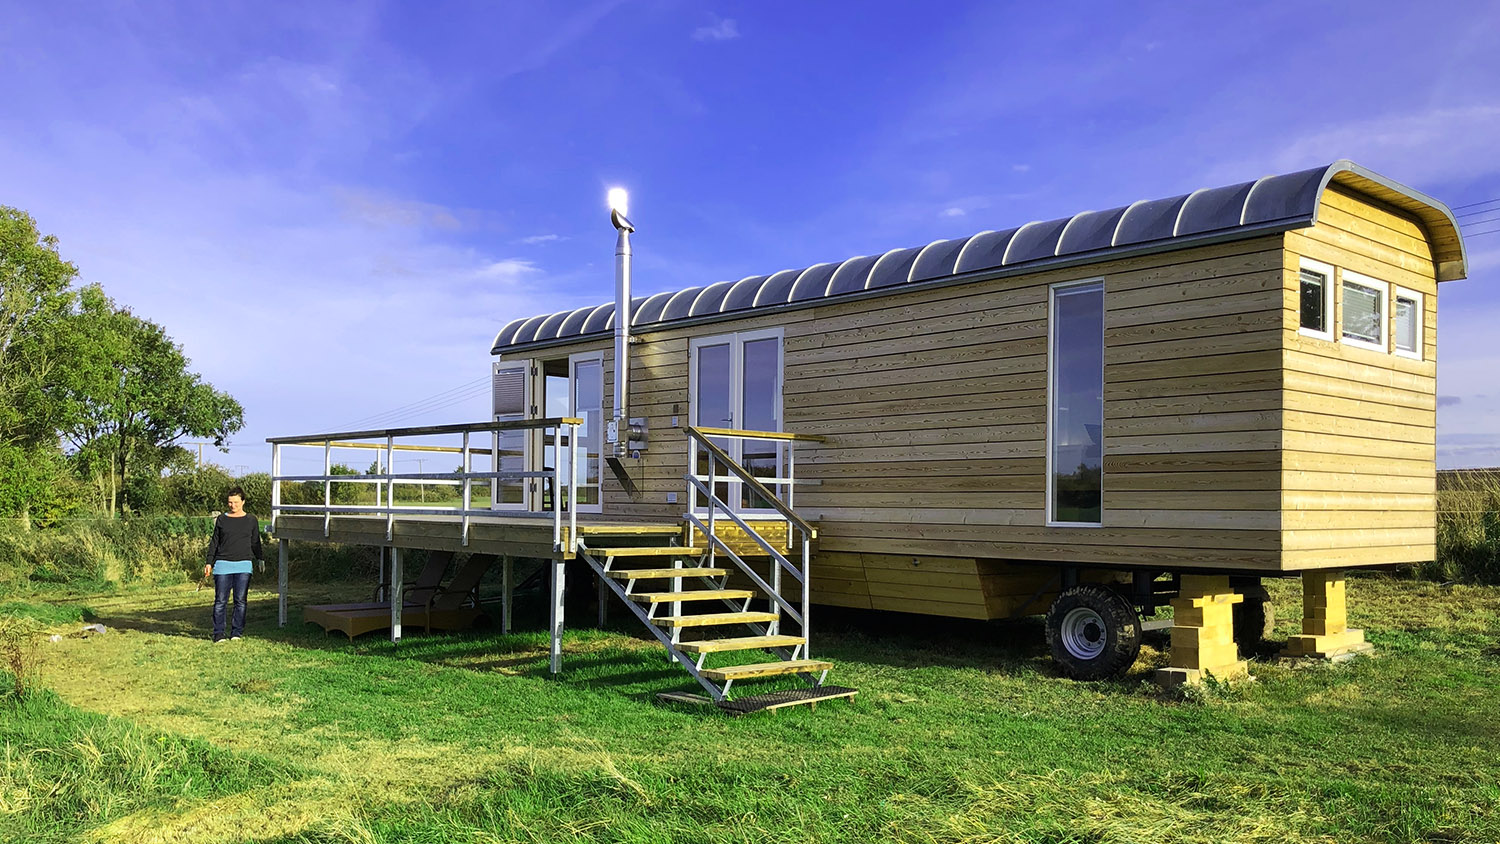 Mobile homes are a new trend in real estate